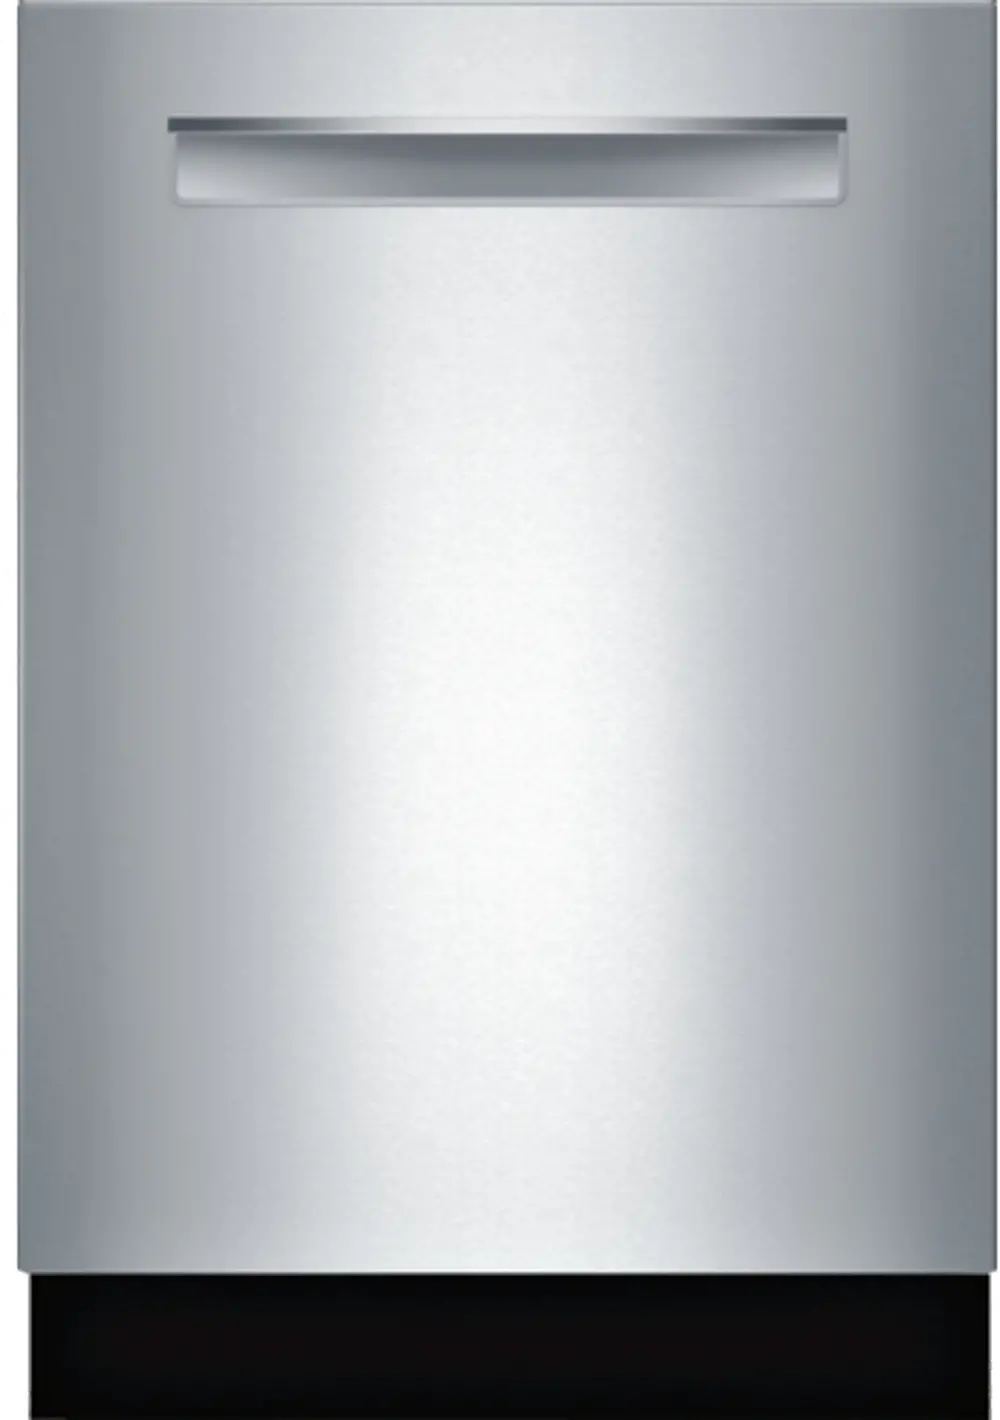 SHP65TL5UC Bosch Stainless Steel Dishwasher-1